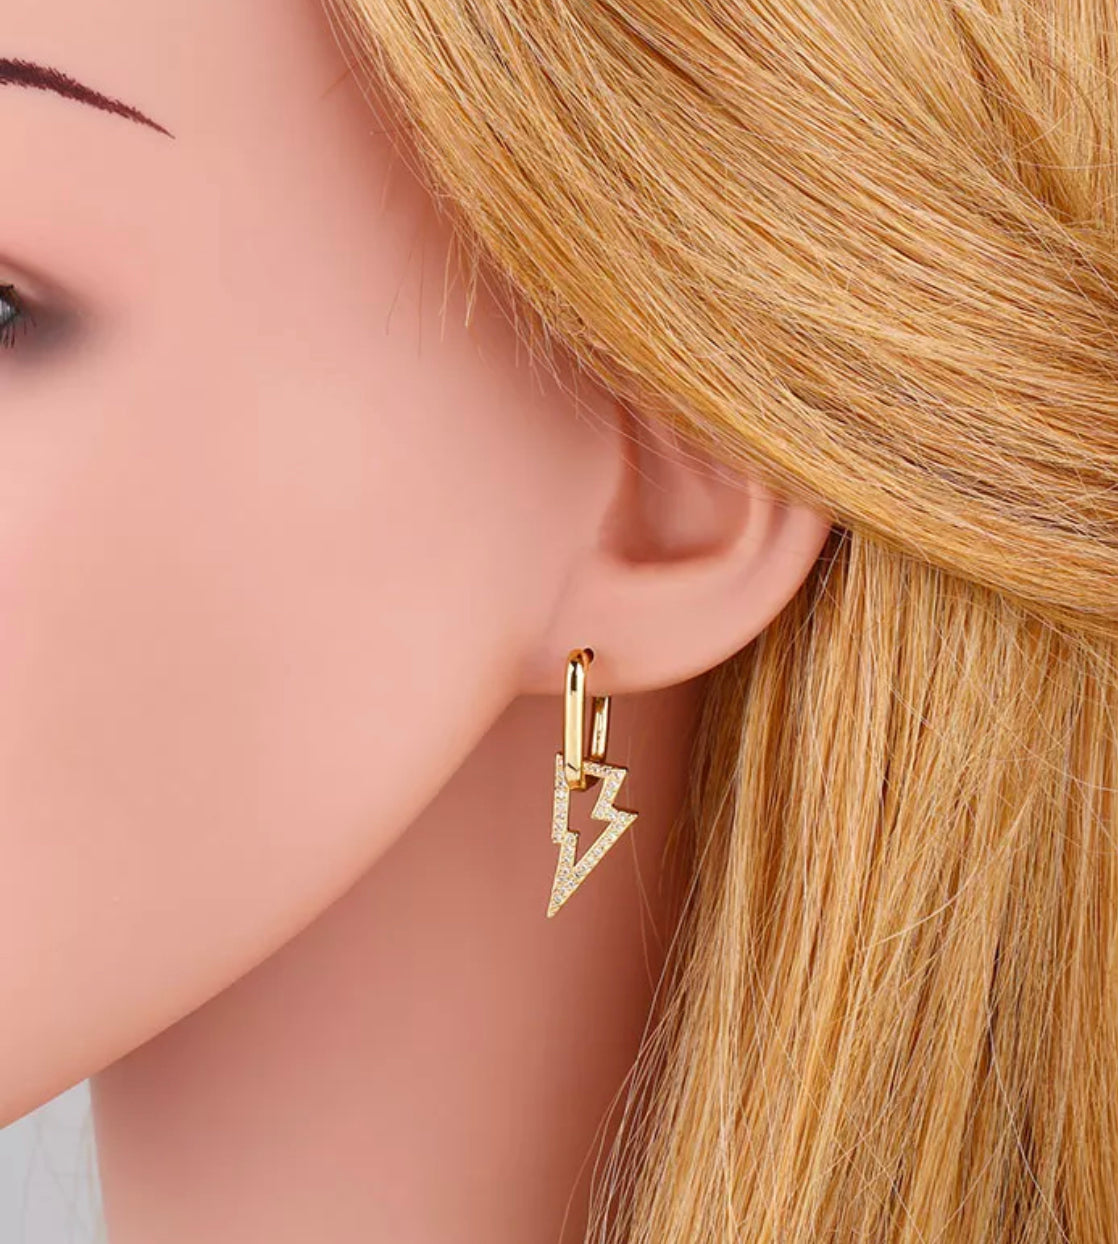 image to show how does lightning earring looks in model